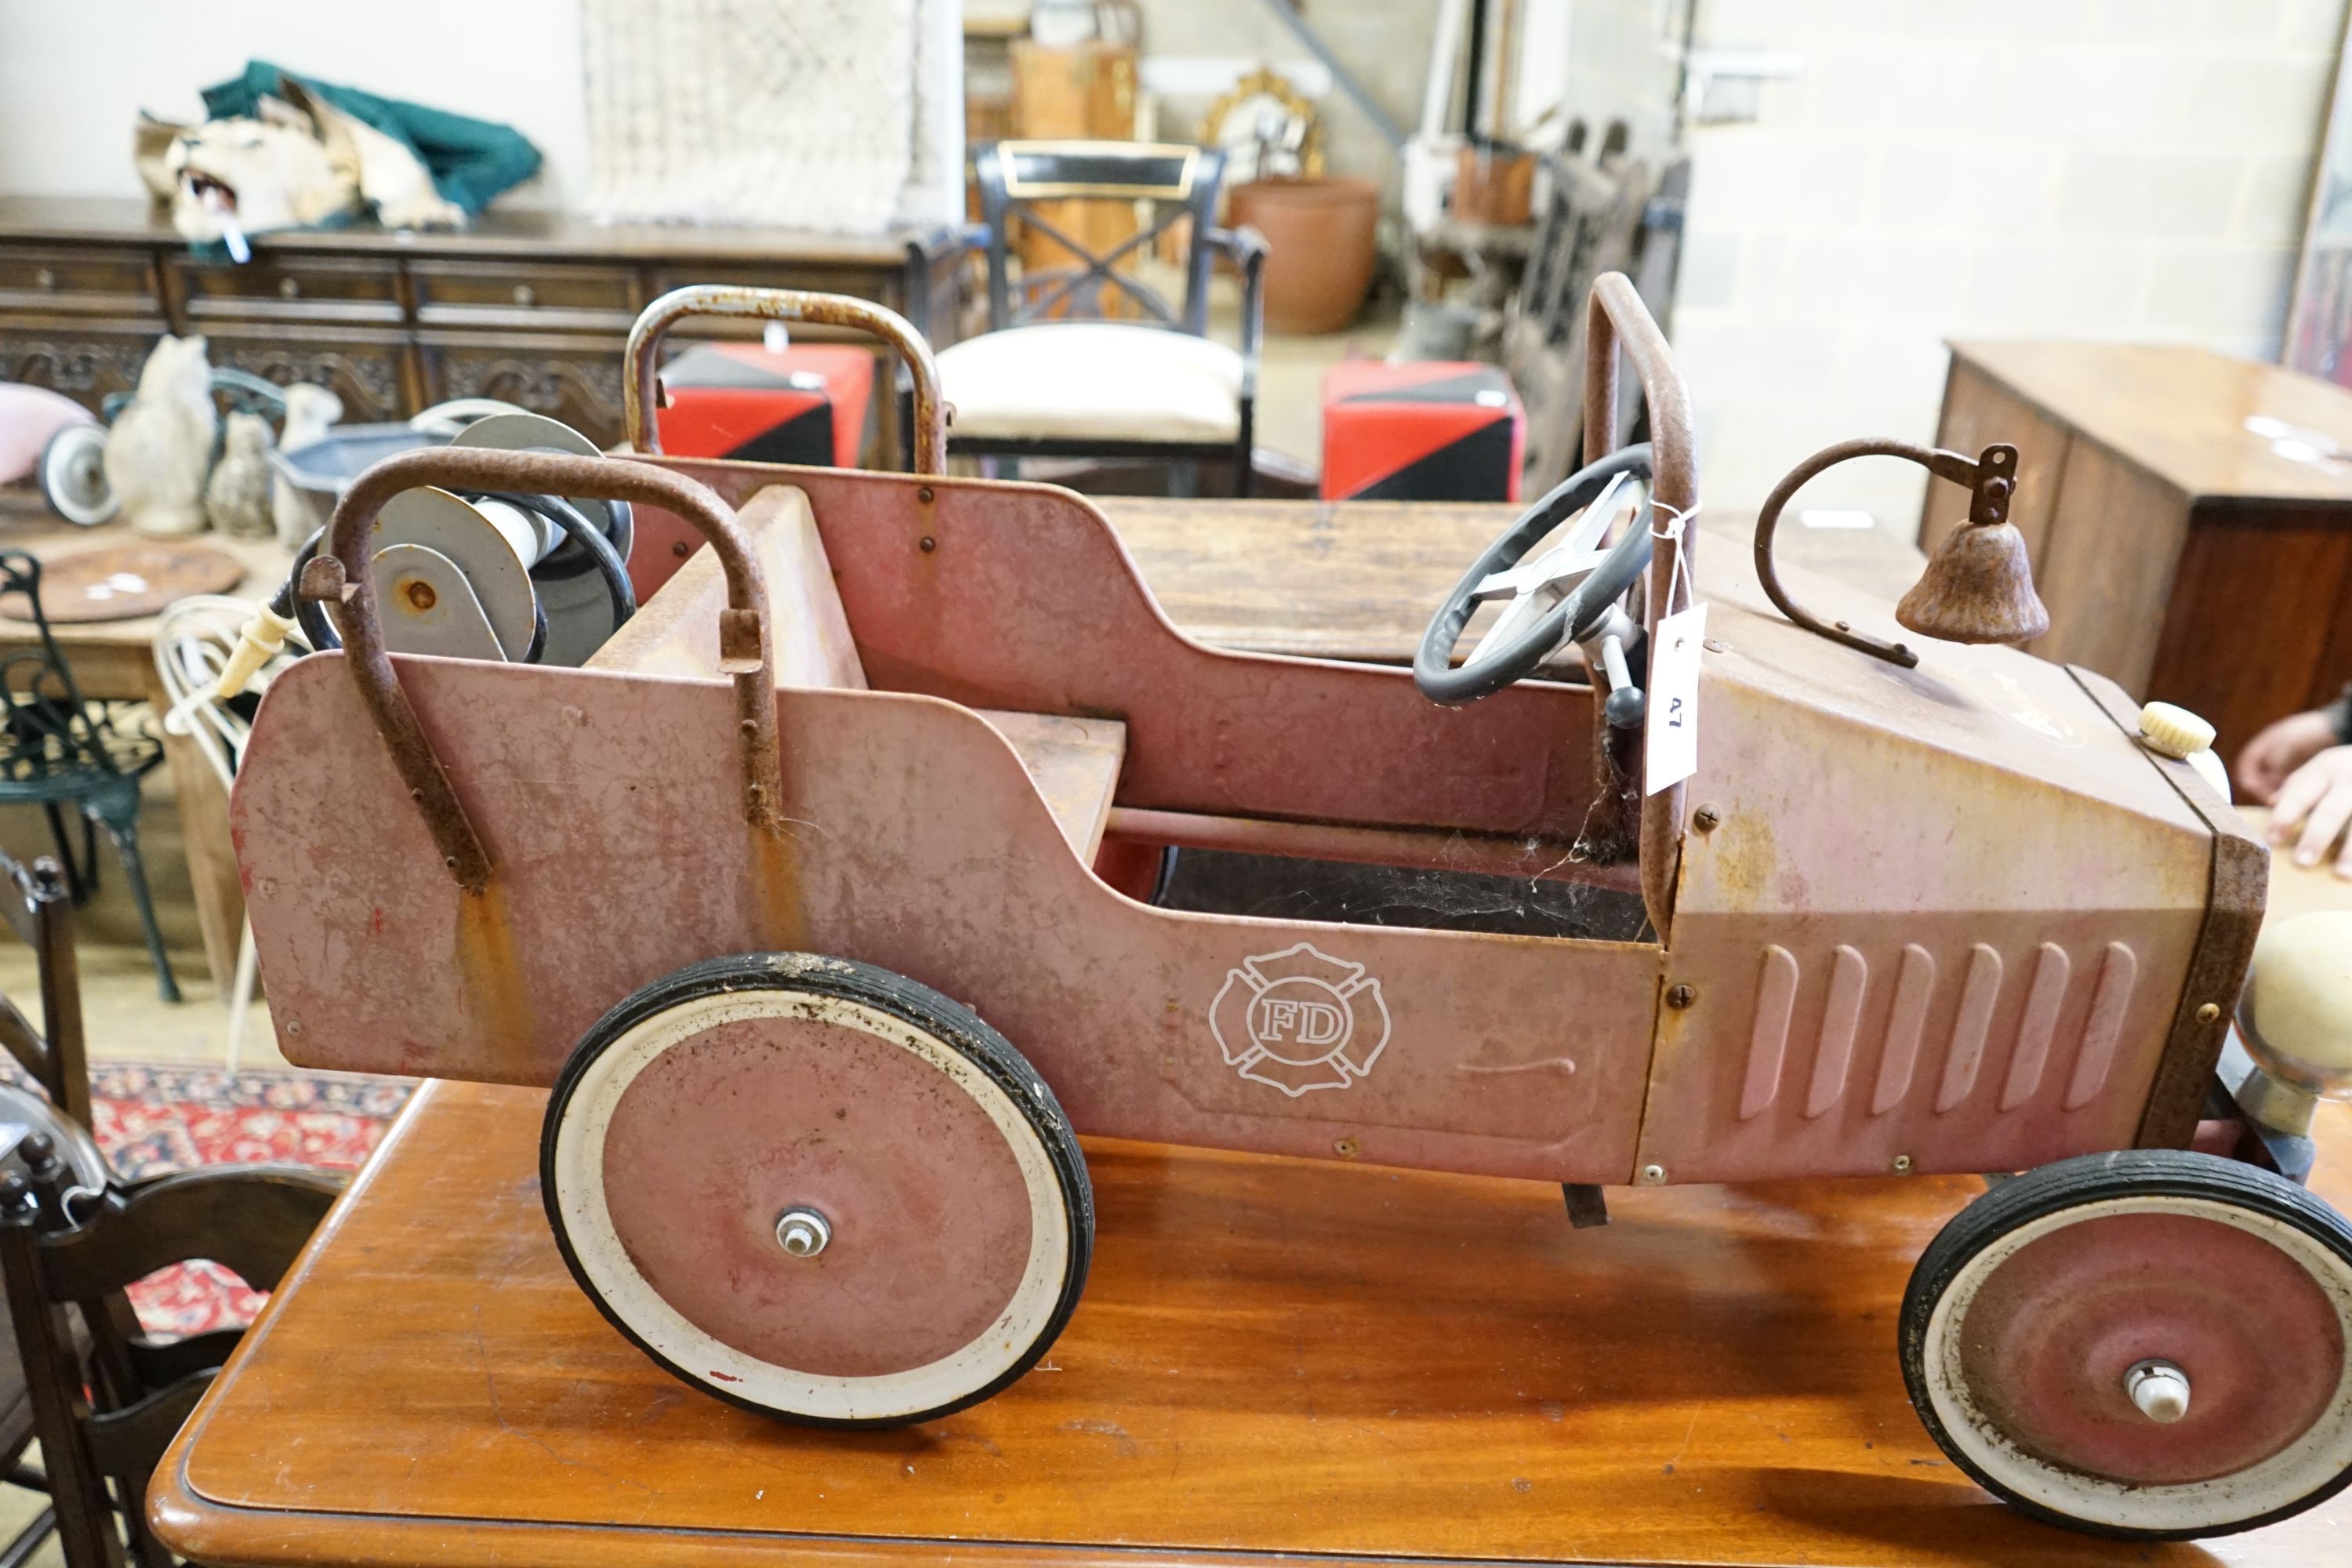 A child's tin plate pedal ride on toy fire engine, length 95cm